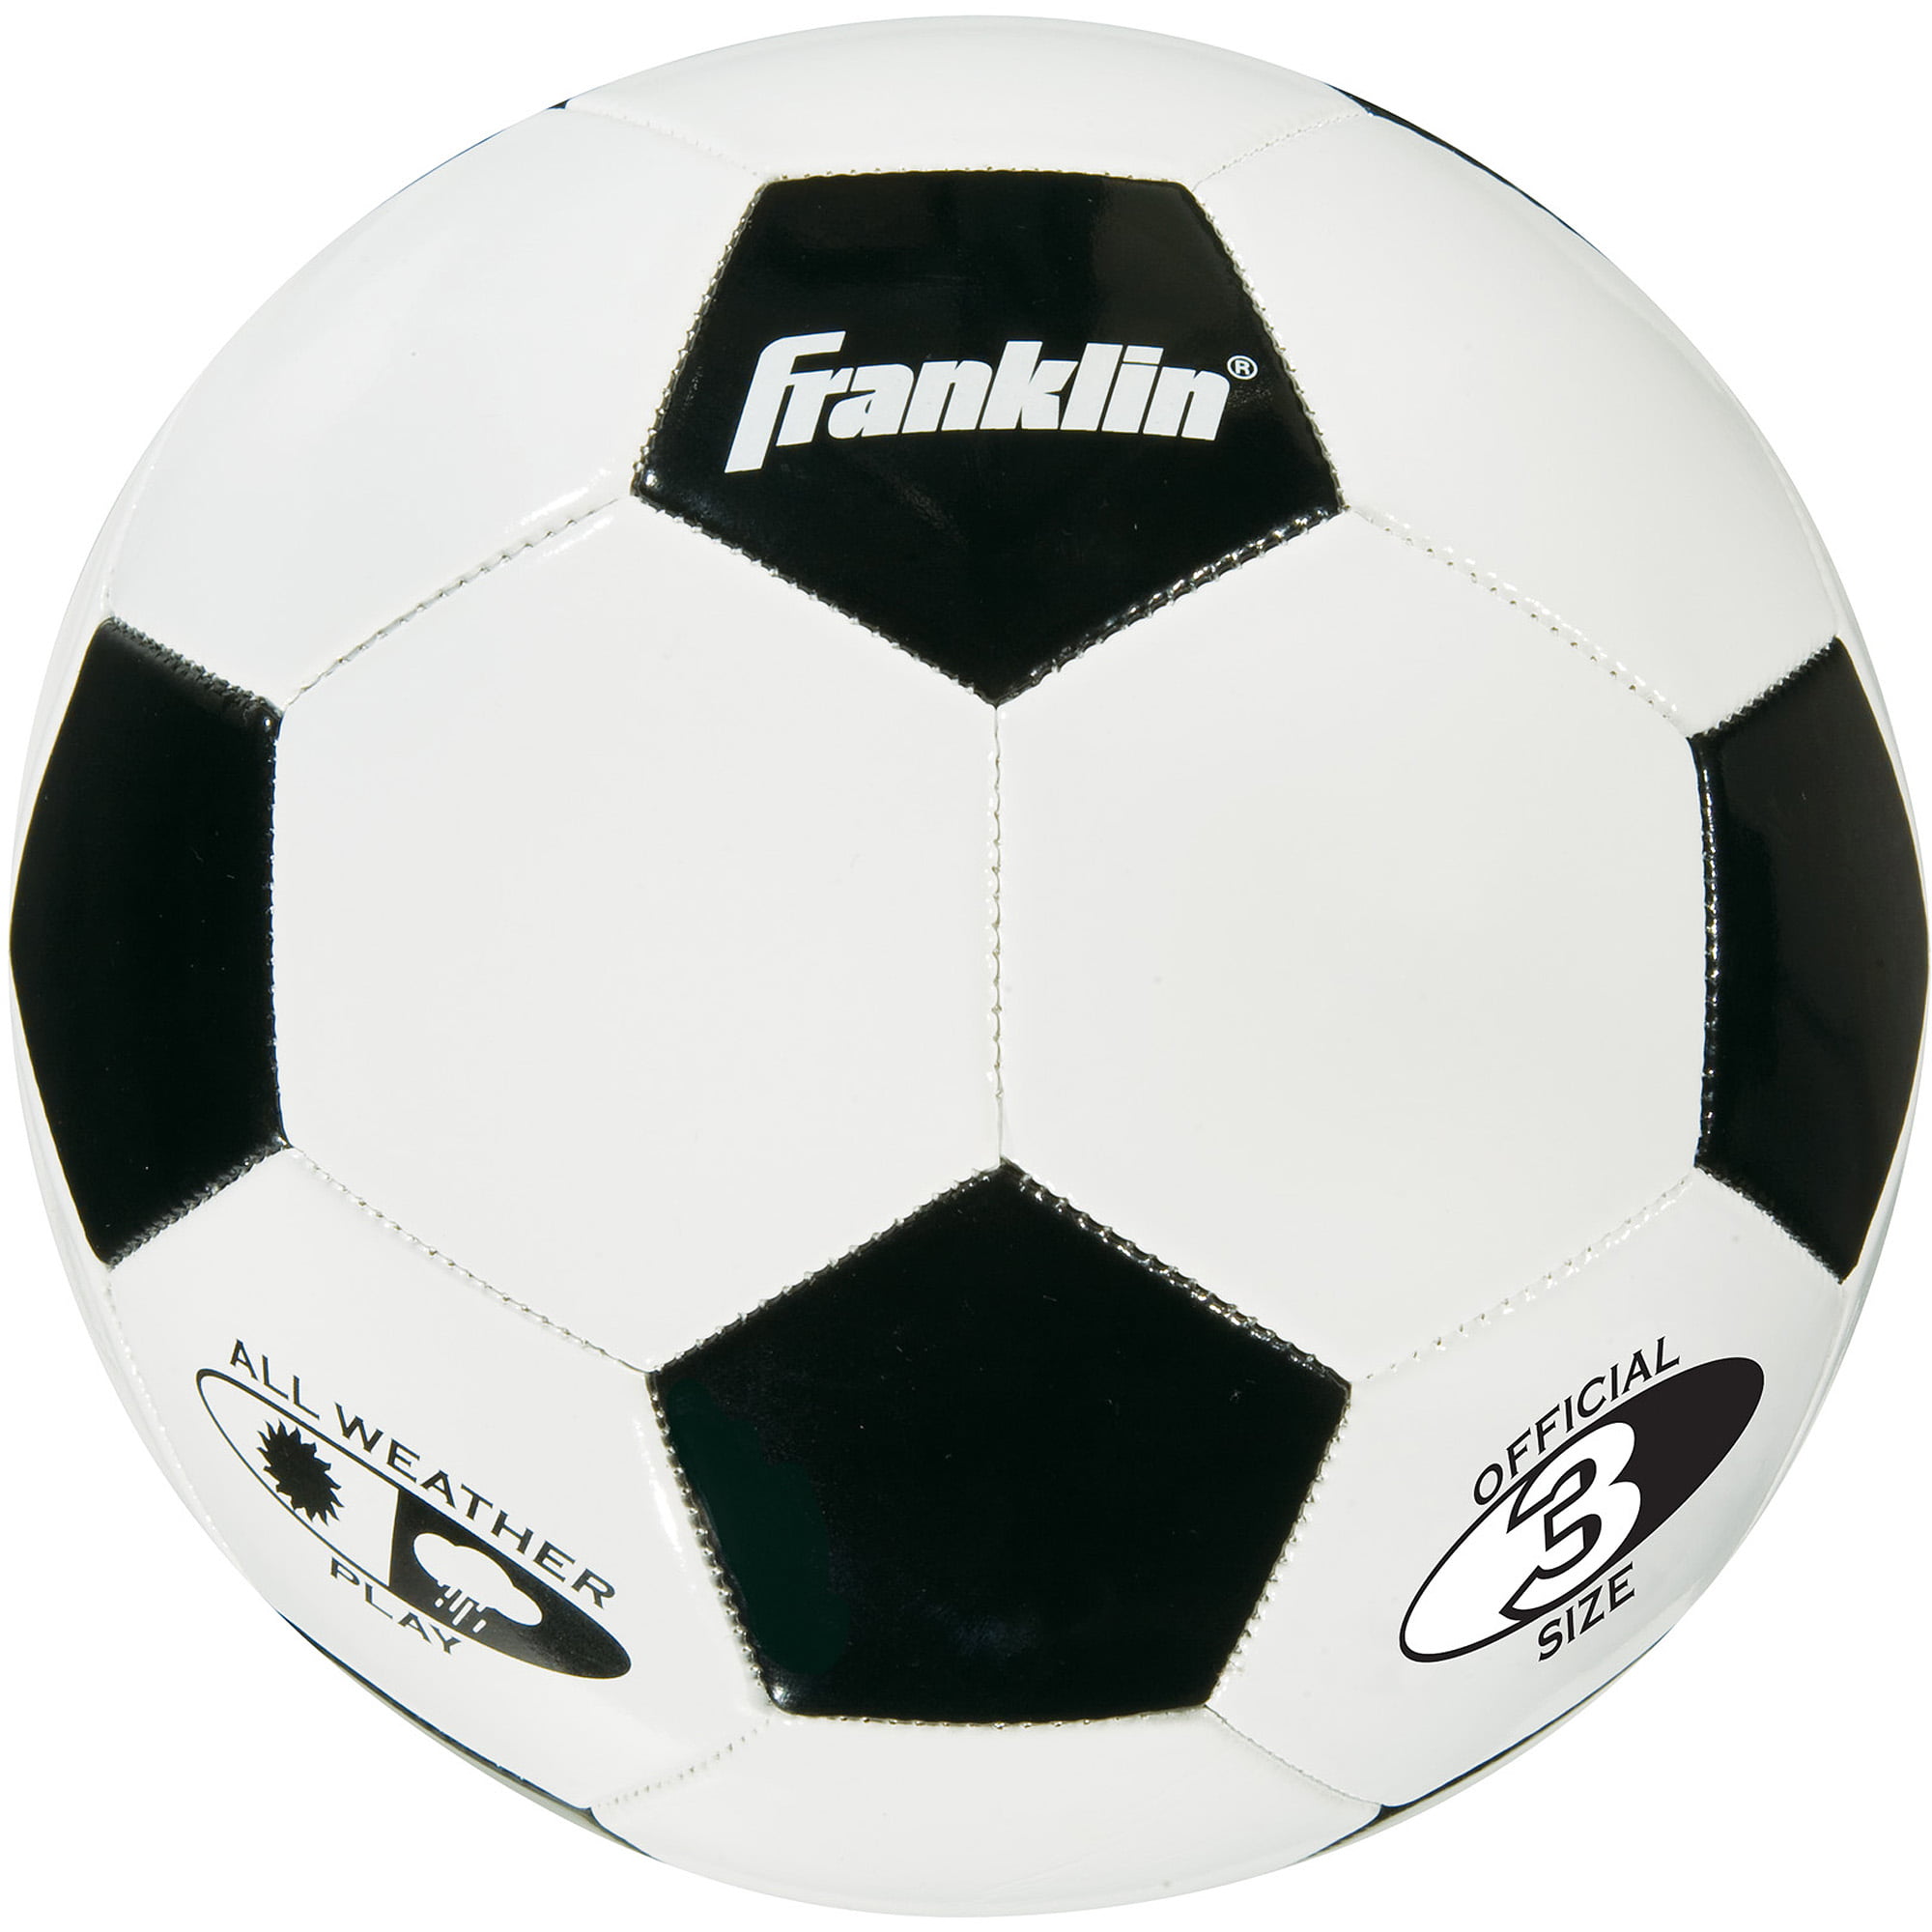 White Size 3 Franklin Sports Soccer Balls Adult Soccer Balls 12 Ball Bulk Packs Single Size 4 Black Competition 100 Youth Size 5 Traditional Soccer Balls 